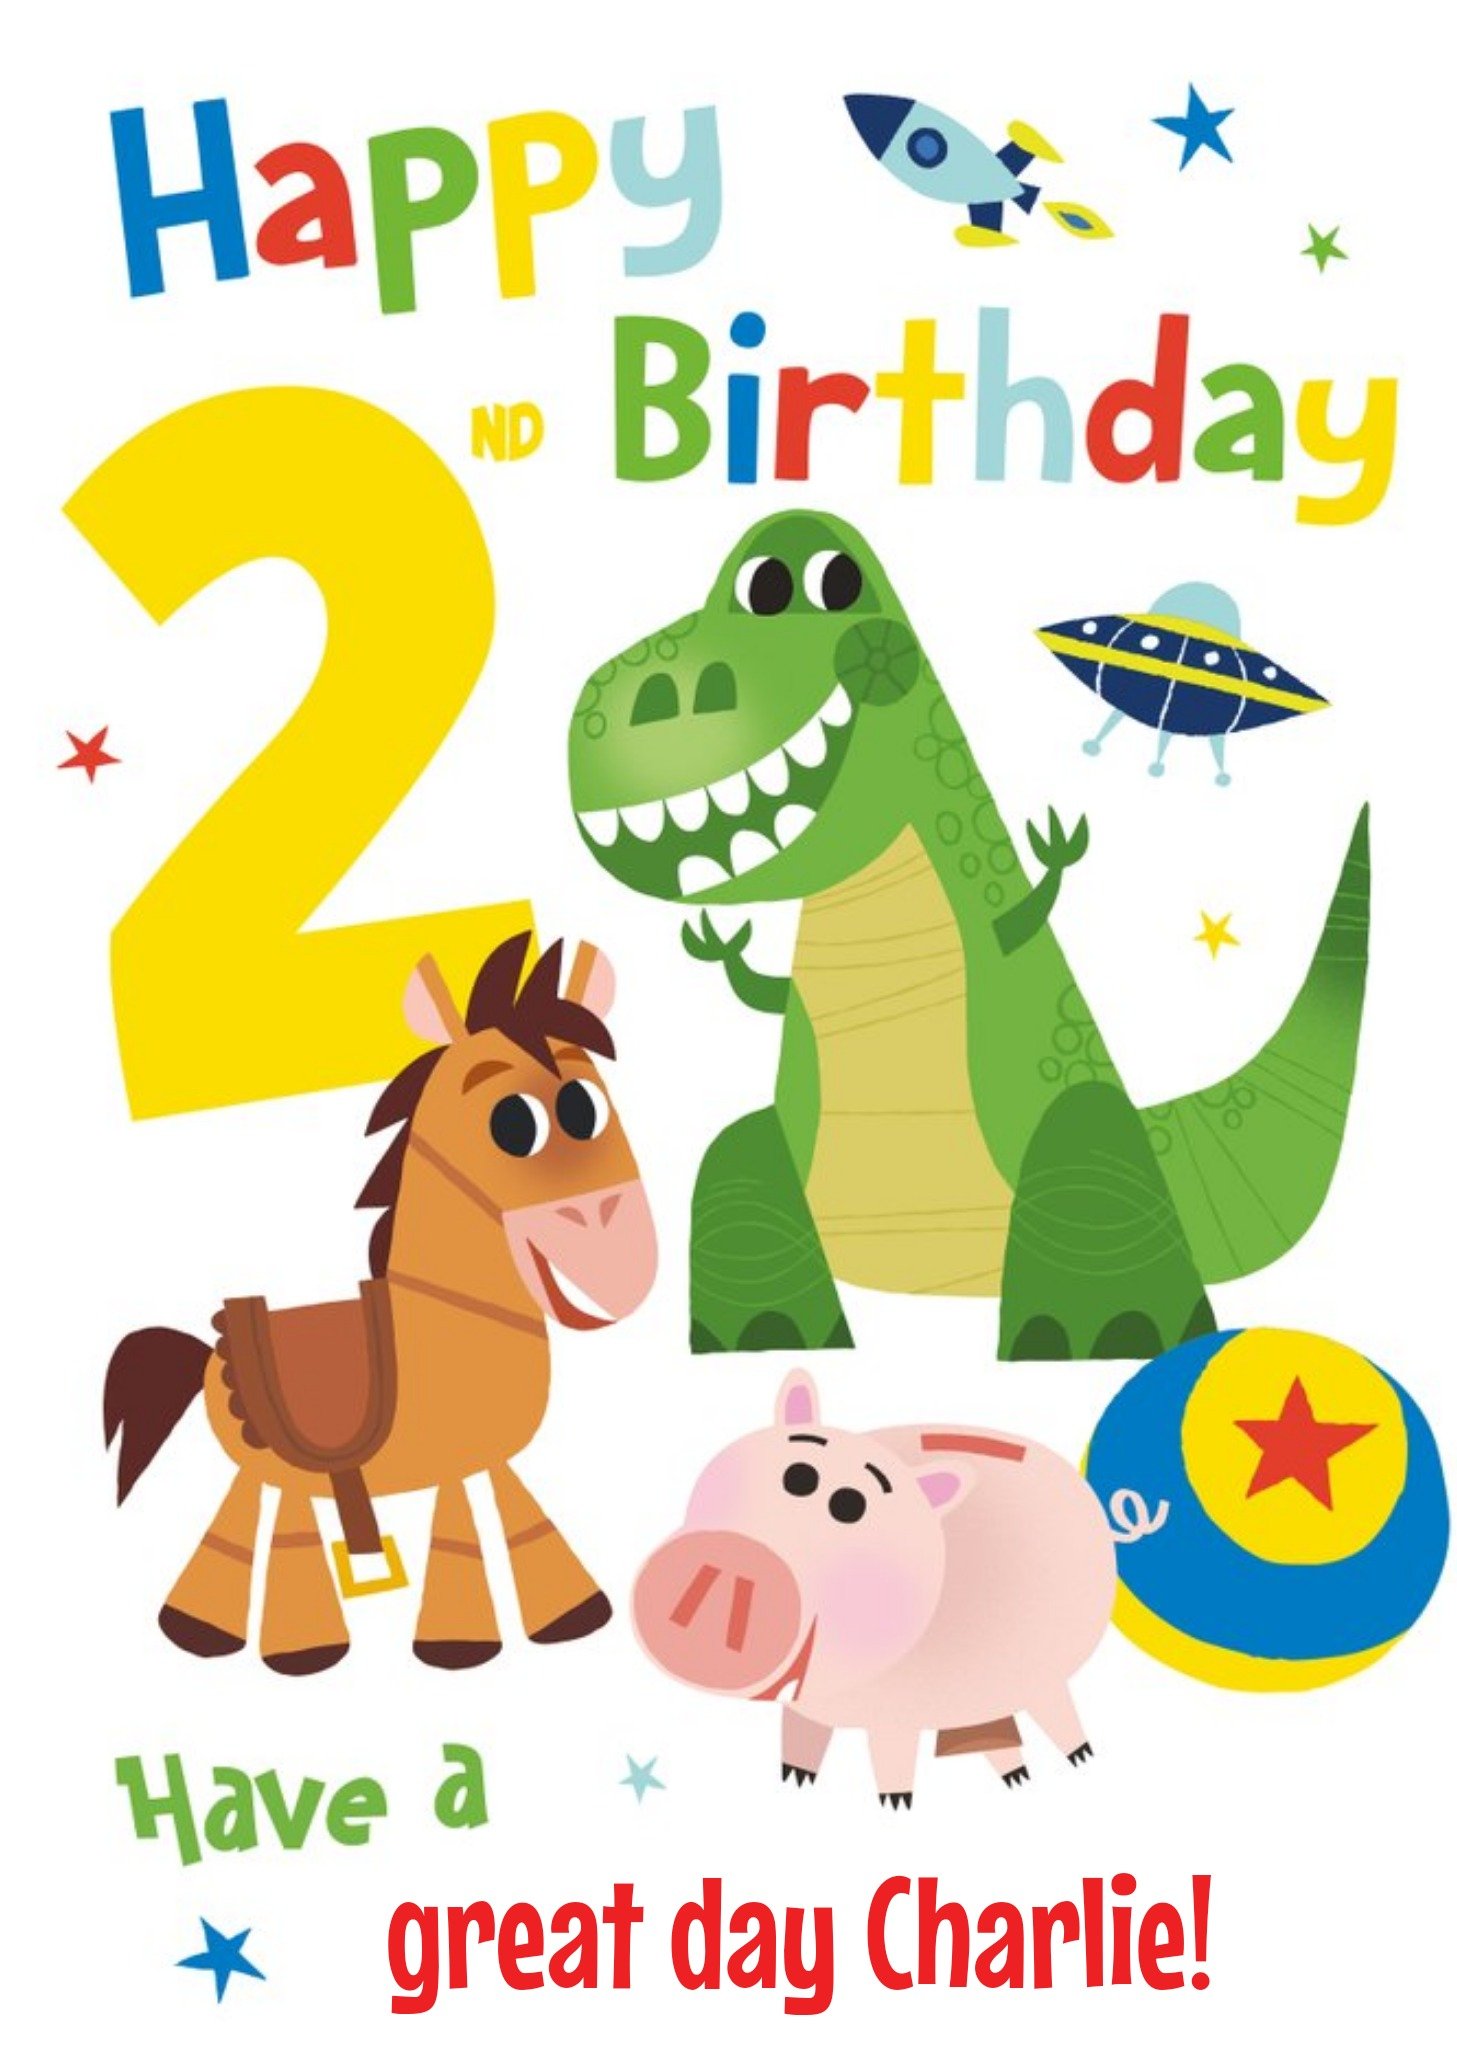 Toy Story Buzz Lightyear Grandson It's Your Birthday Card, Large